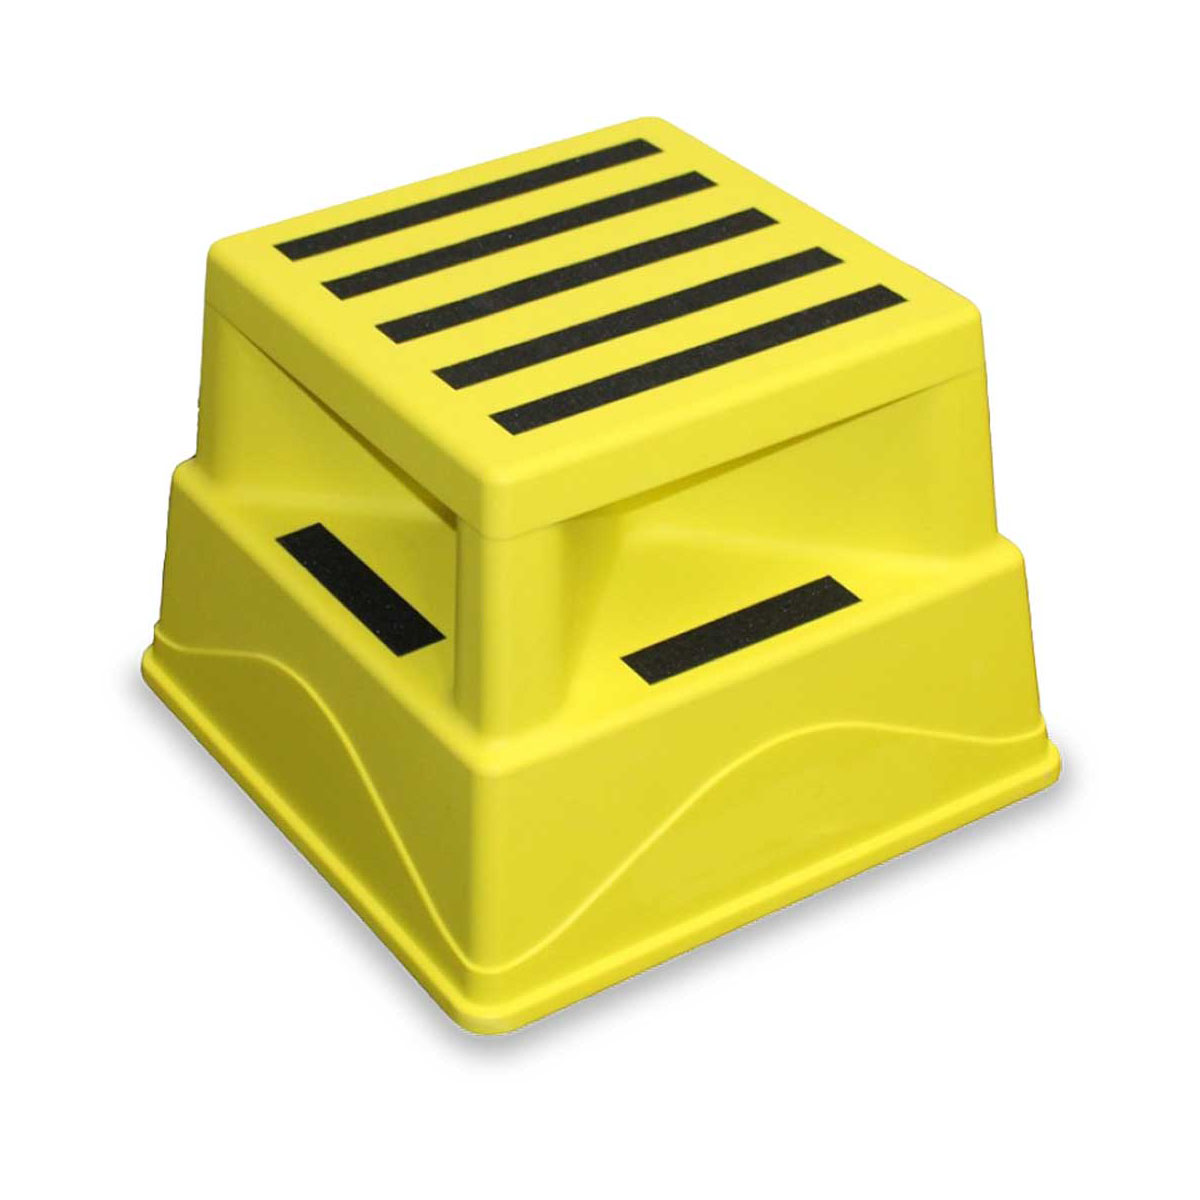 Buy Step Stool - Square HD in Step Stools from Astrolift NZ